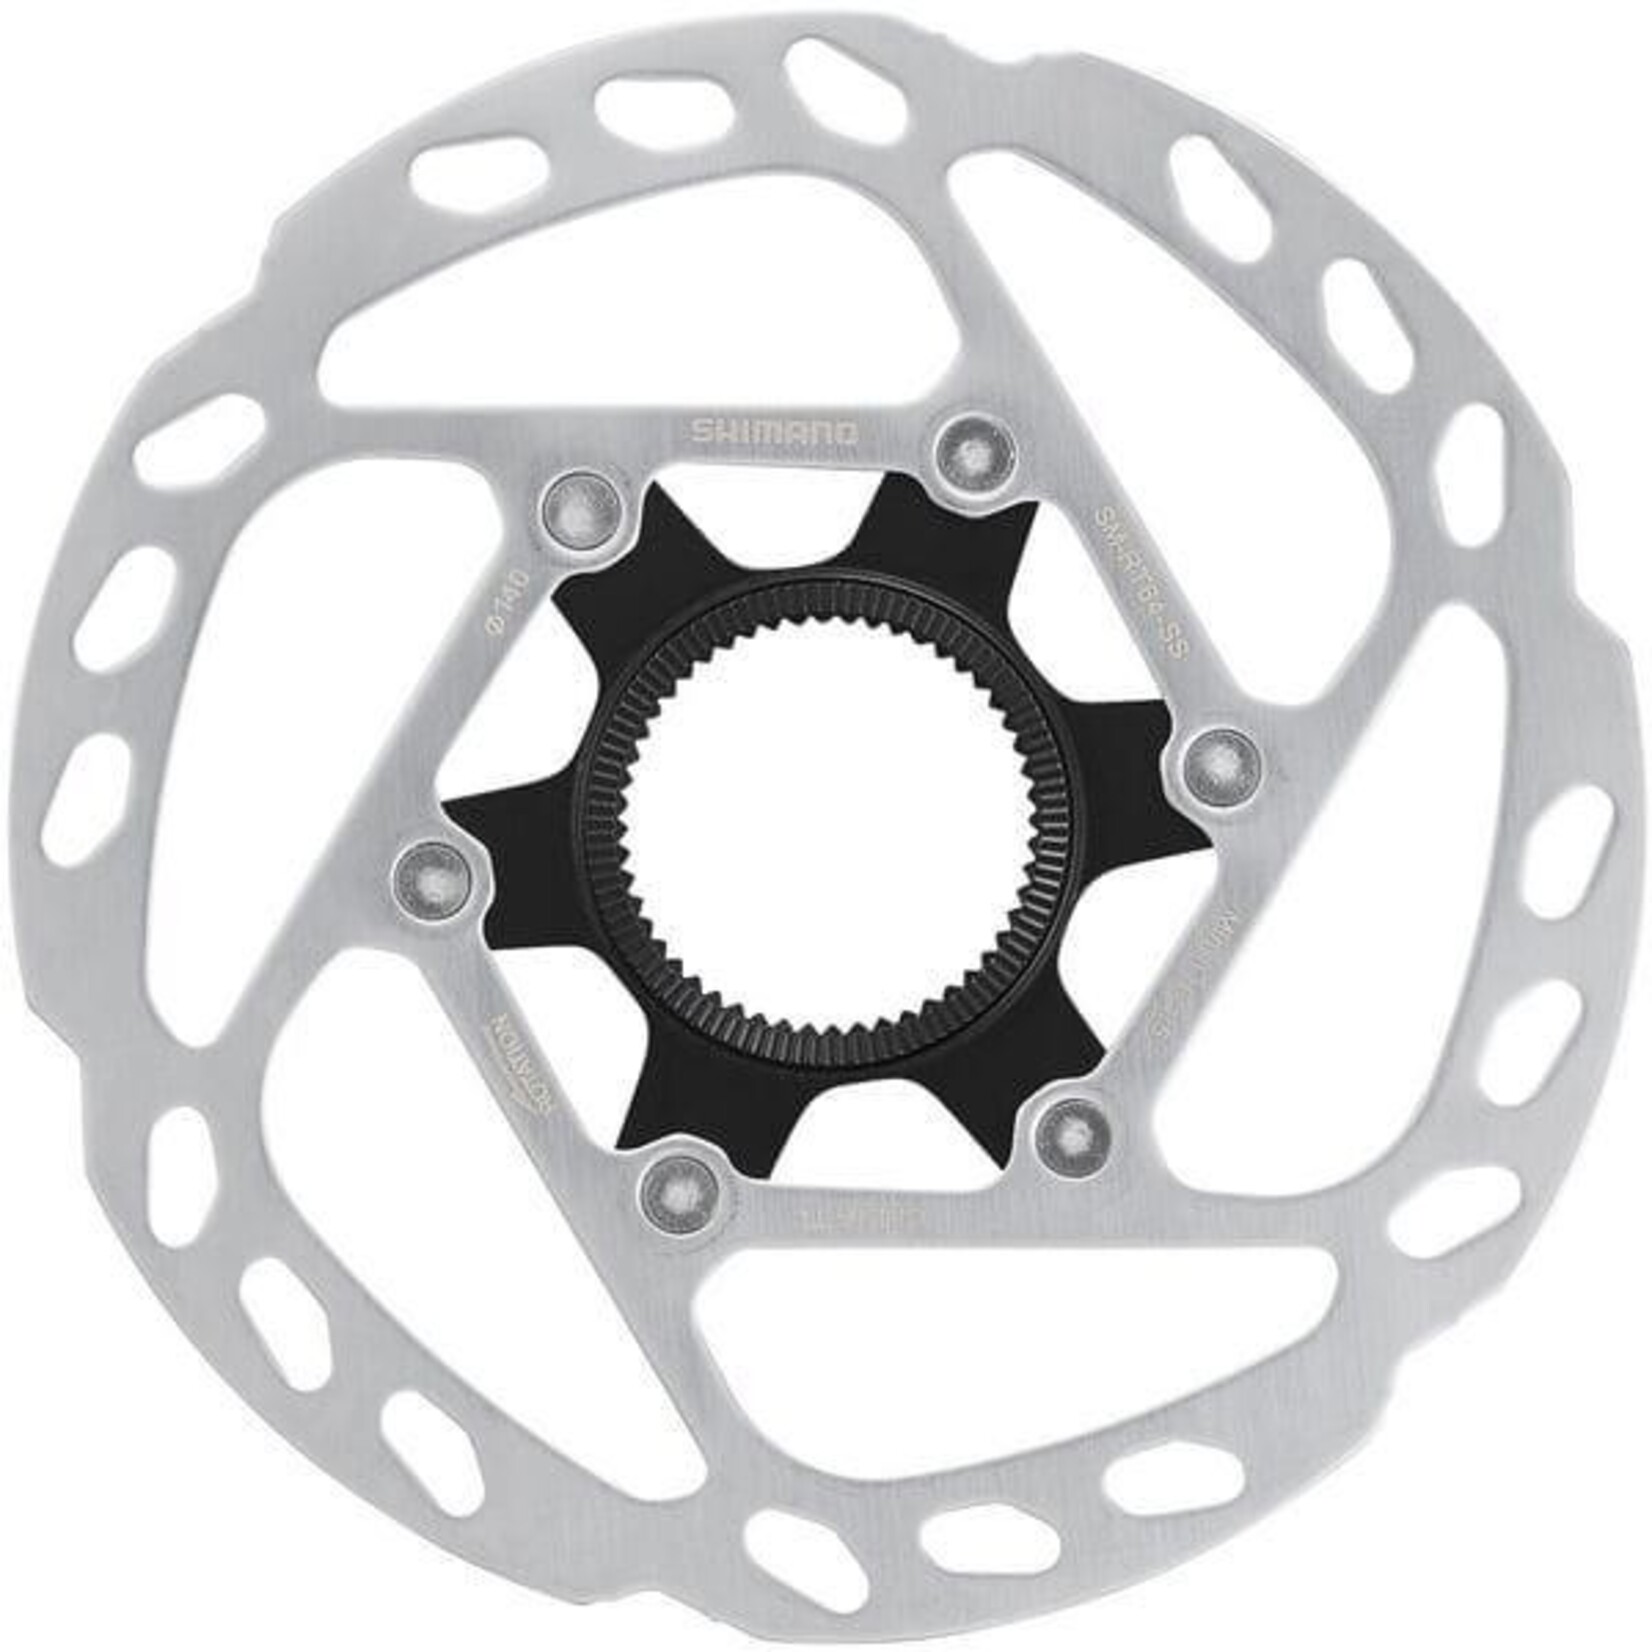 Shimano Deore SM-RT64 Deore Centre-Lock disc rotor 160 mm